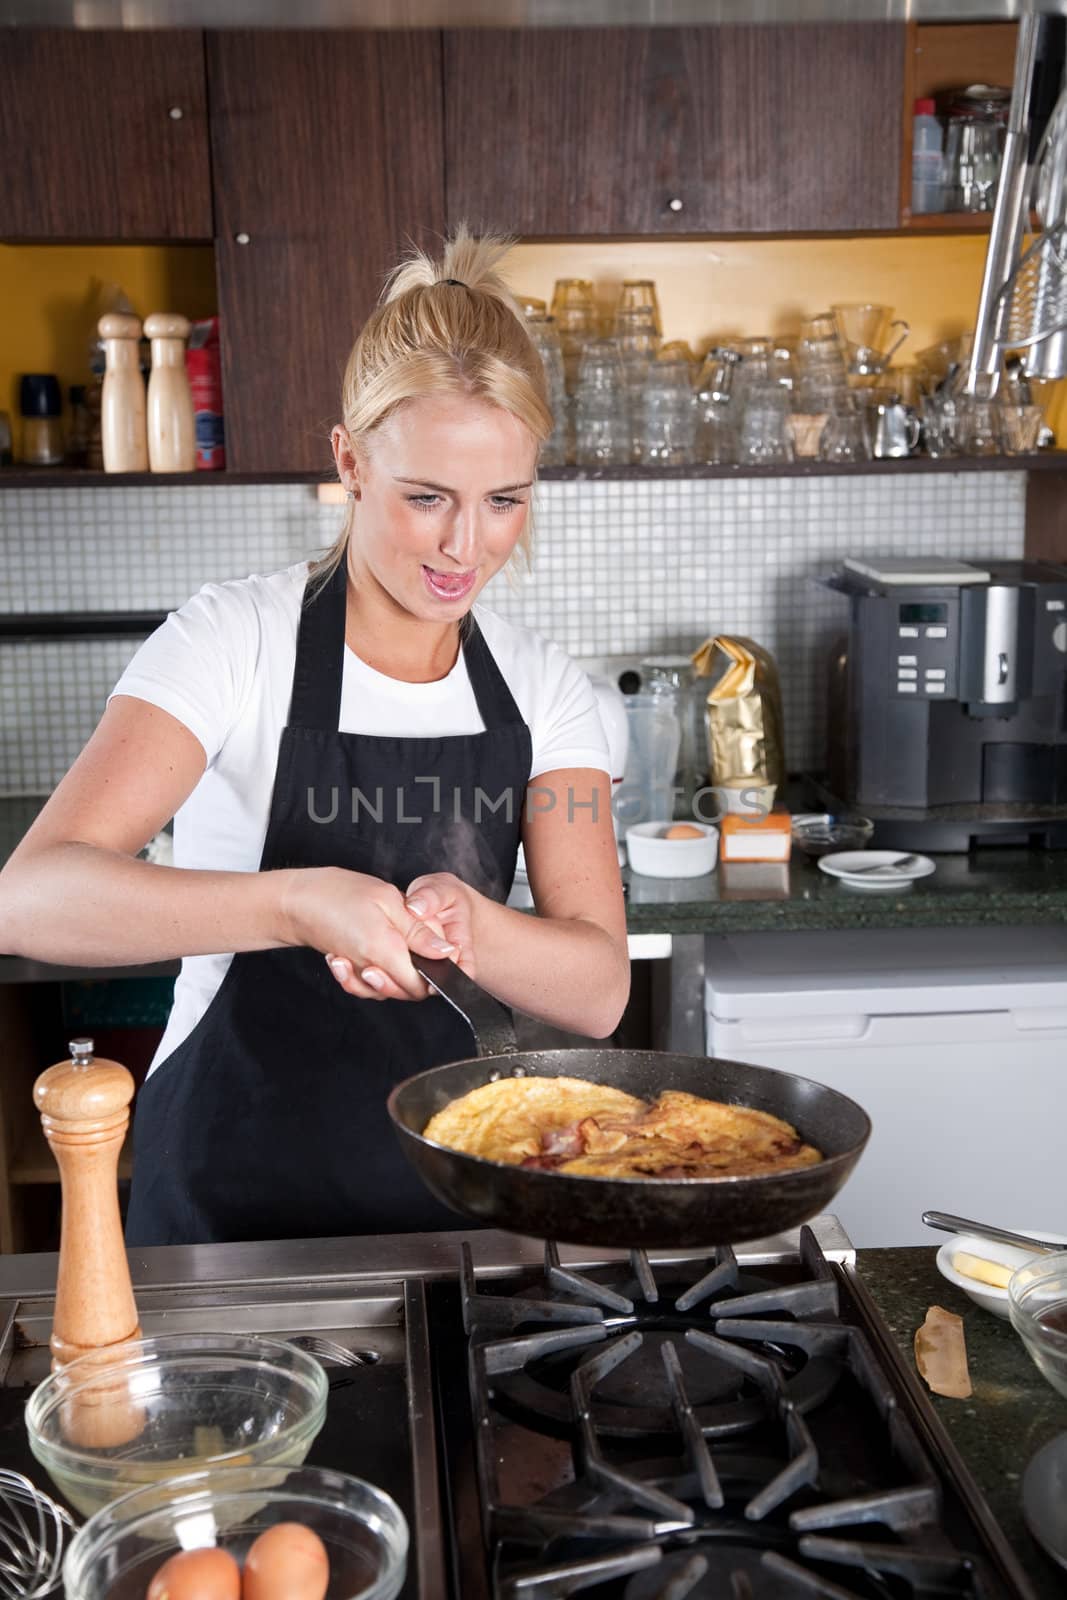 Female chef looking concentrated at the frying pan about to flip her egg